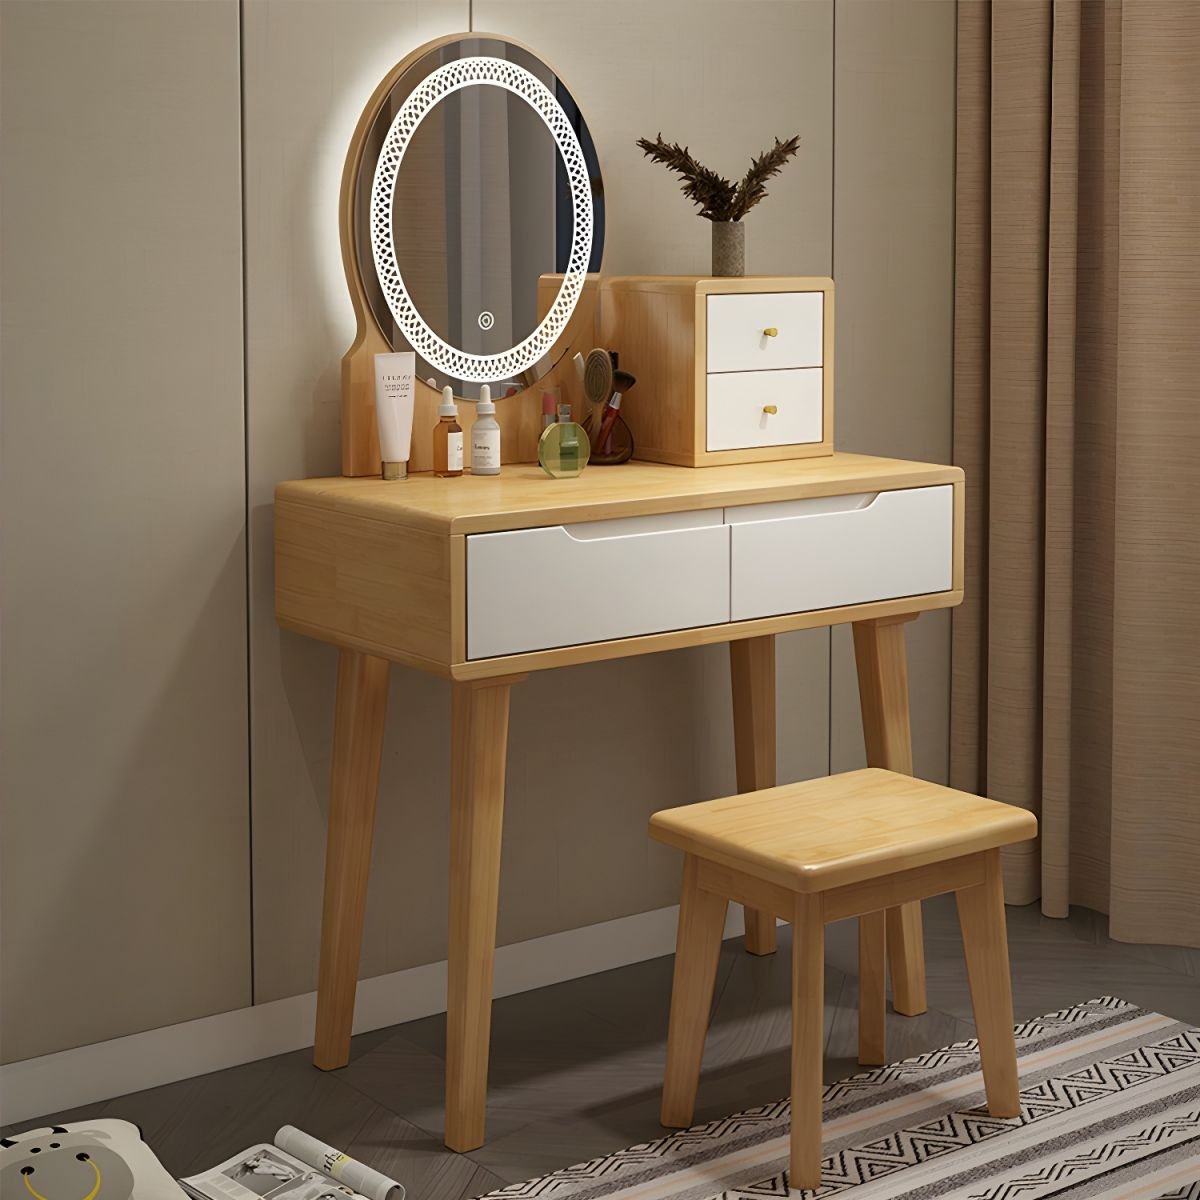 Modern Simple Style Standard Dressing Table Wood Grain Wood with Mirror Lights and Chair, Natural Wood/ White, Makeup Vanity & Mirror & Stools